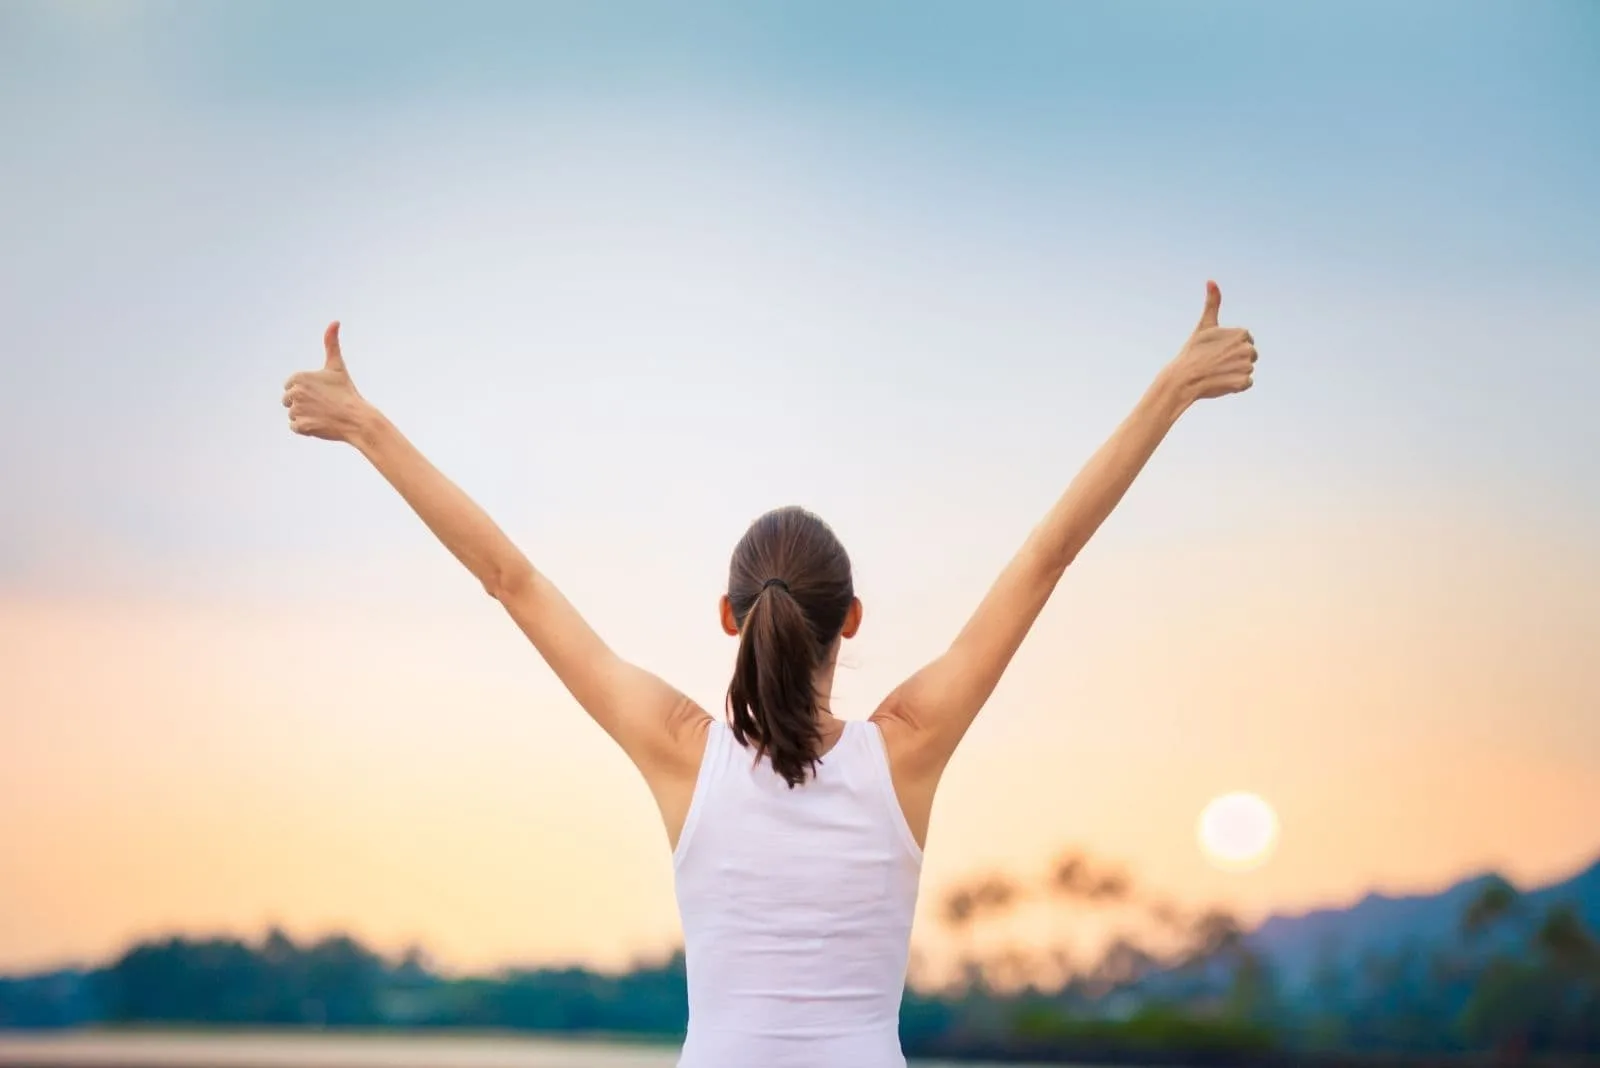 athletic woman raising her hands with thumbs up faciing the sunrise/sunset outdoors